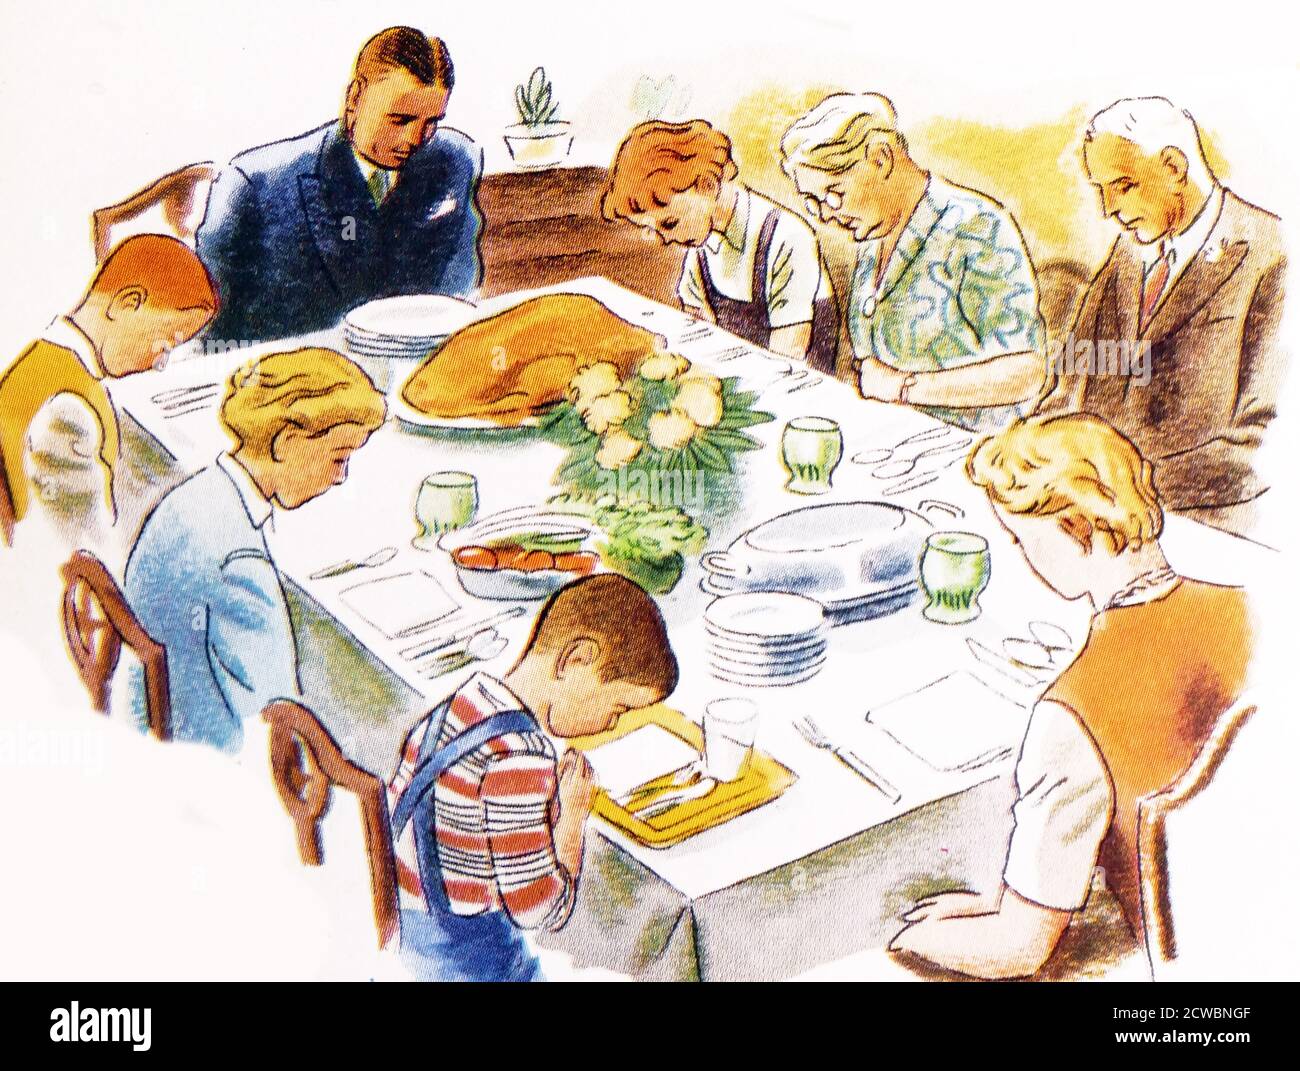 Illustration showing Thanksgiving day meal with an American family Stock Photo